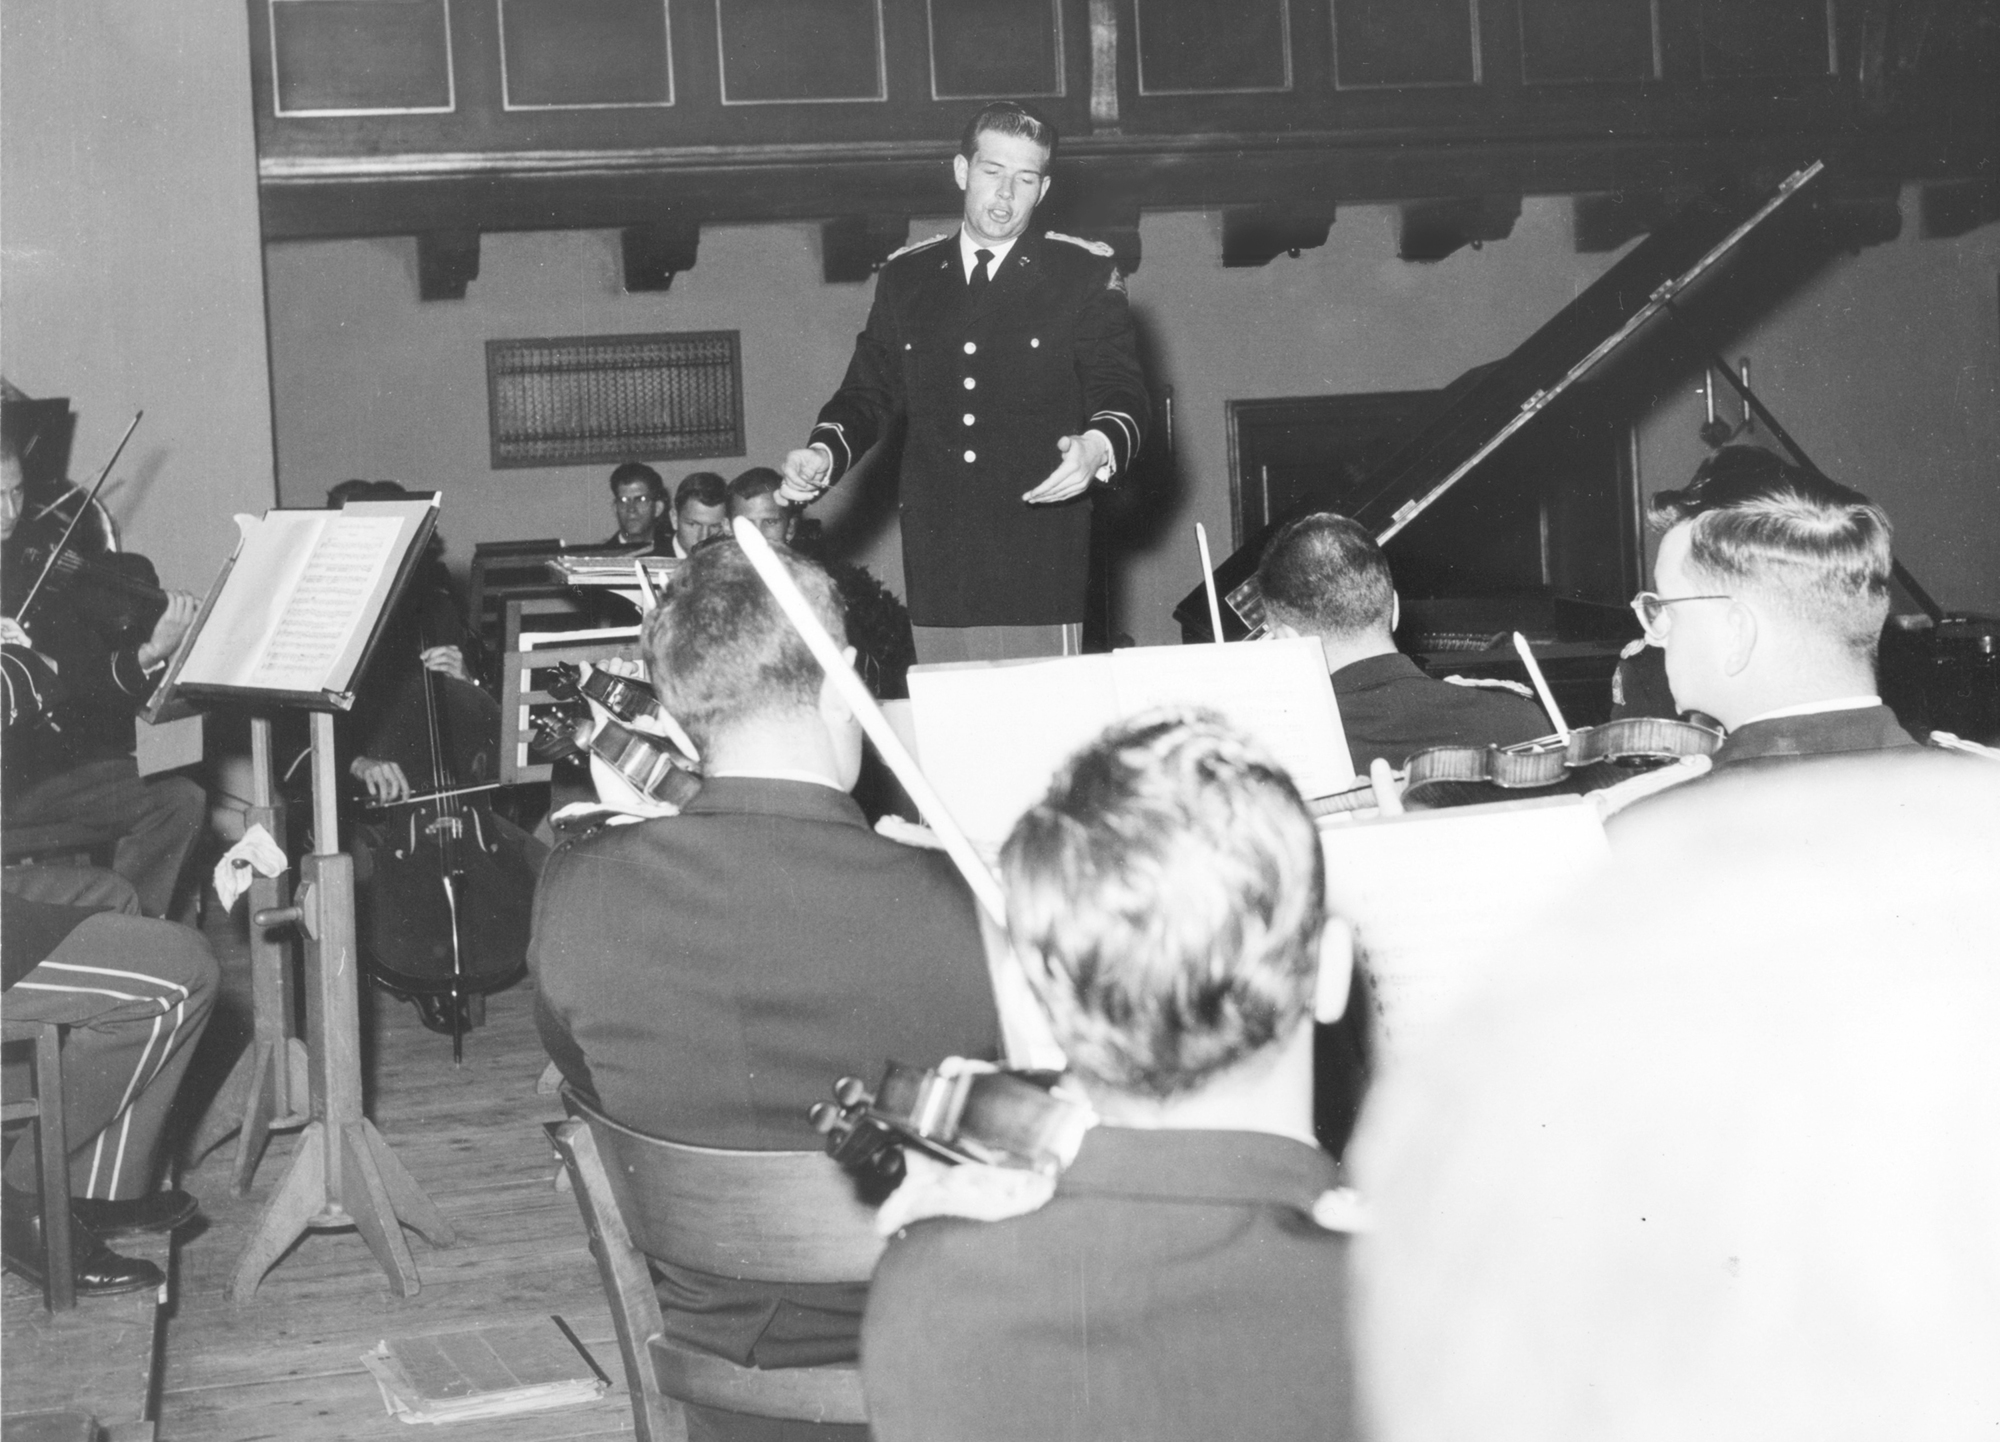 Edward Alley with the Seventh Army Symphony in Garmish Germany, 1968.